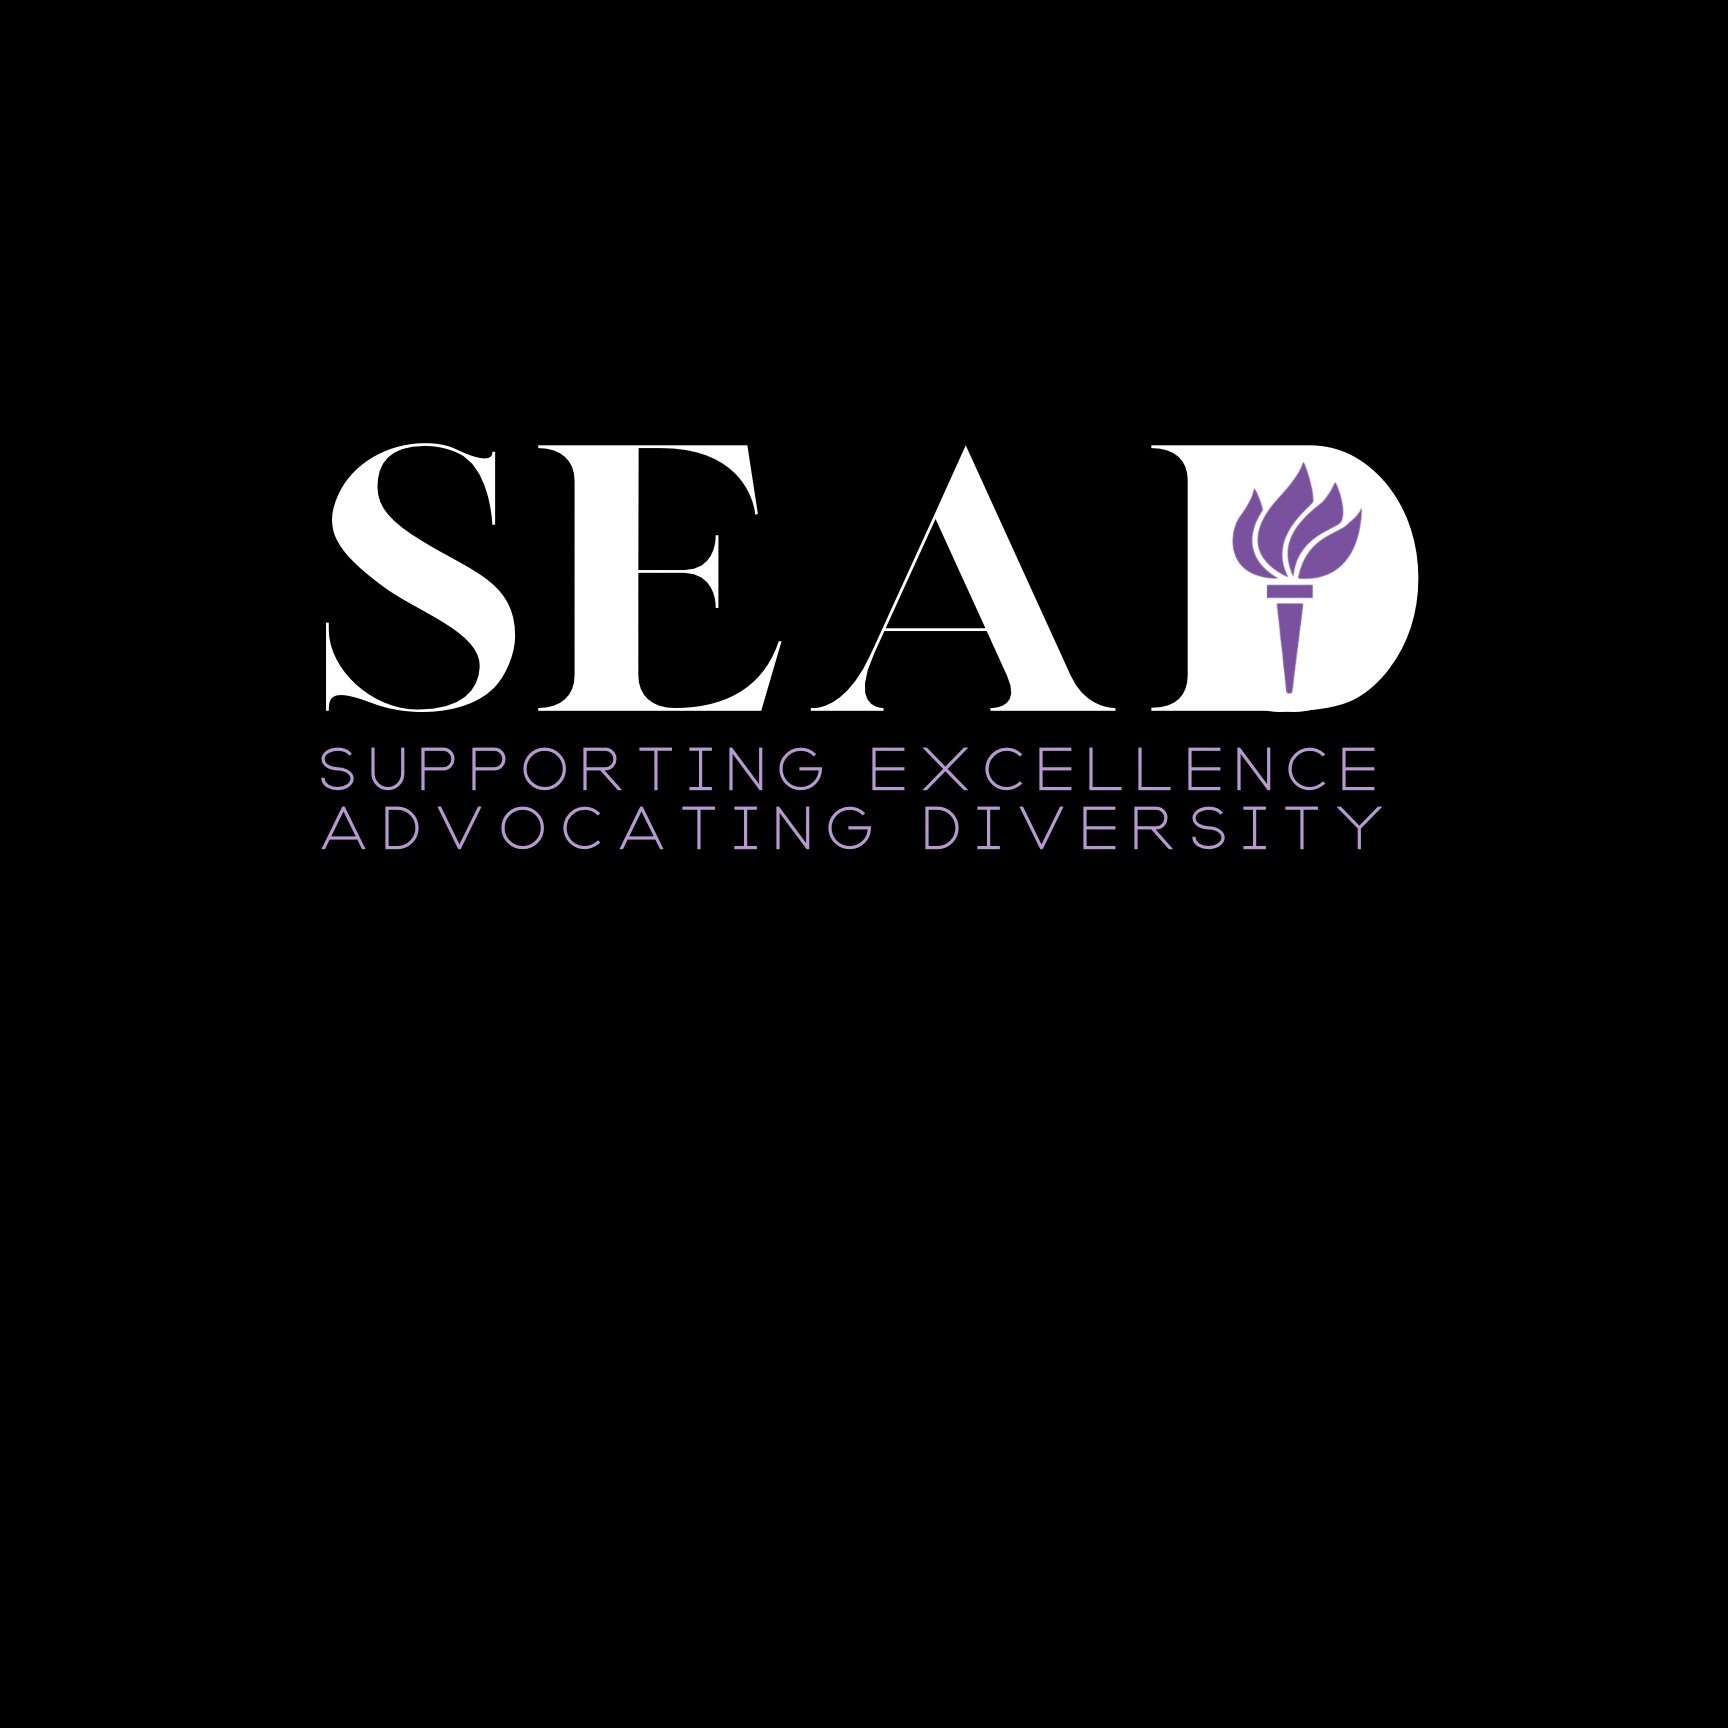 Supporting Excellence and Advocating Diversity